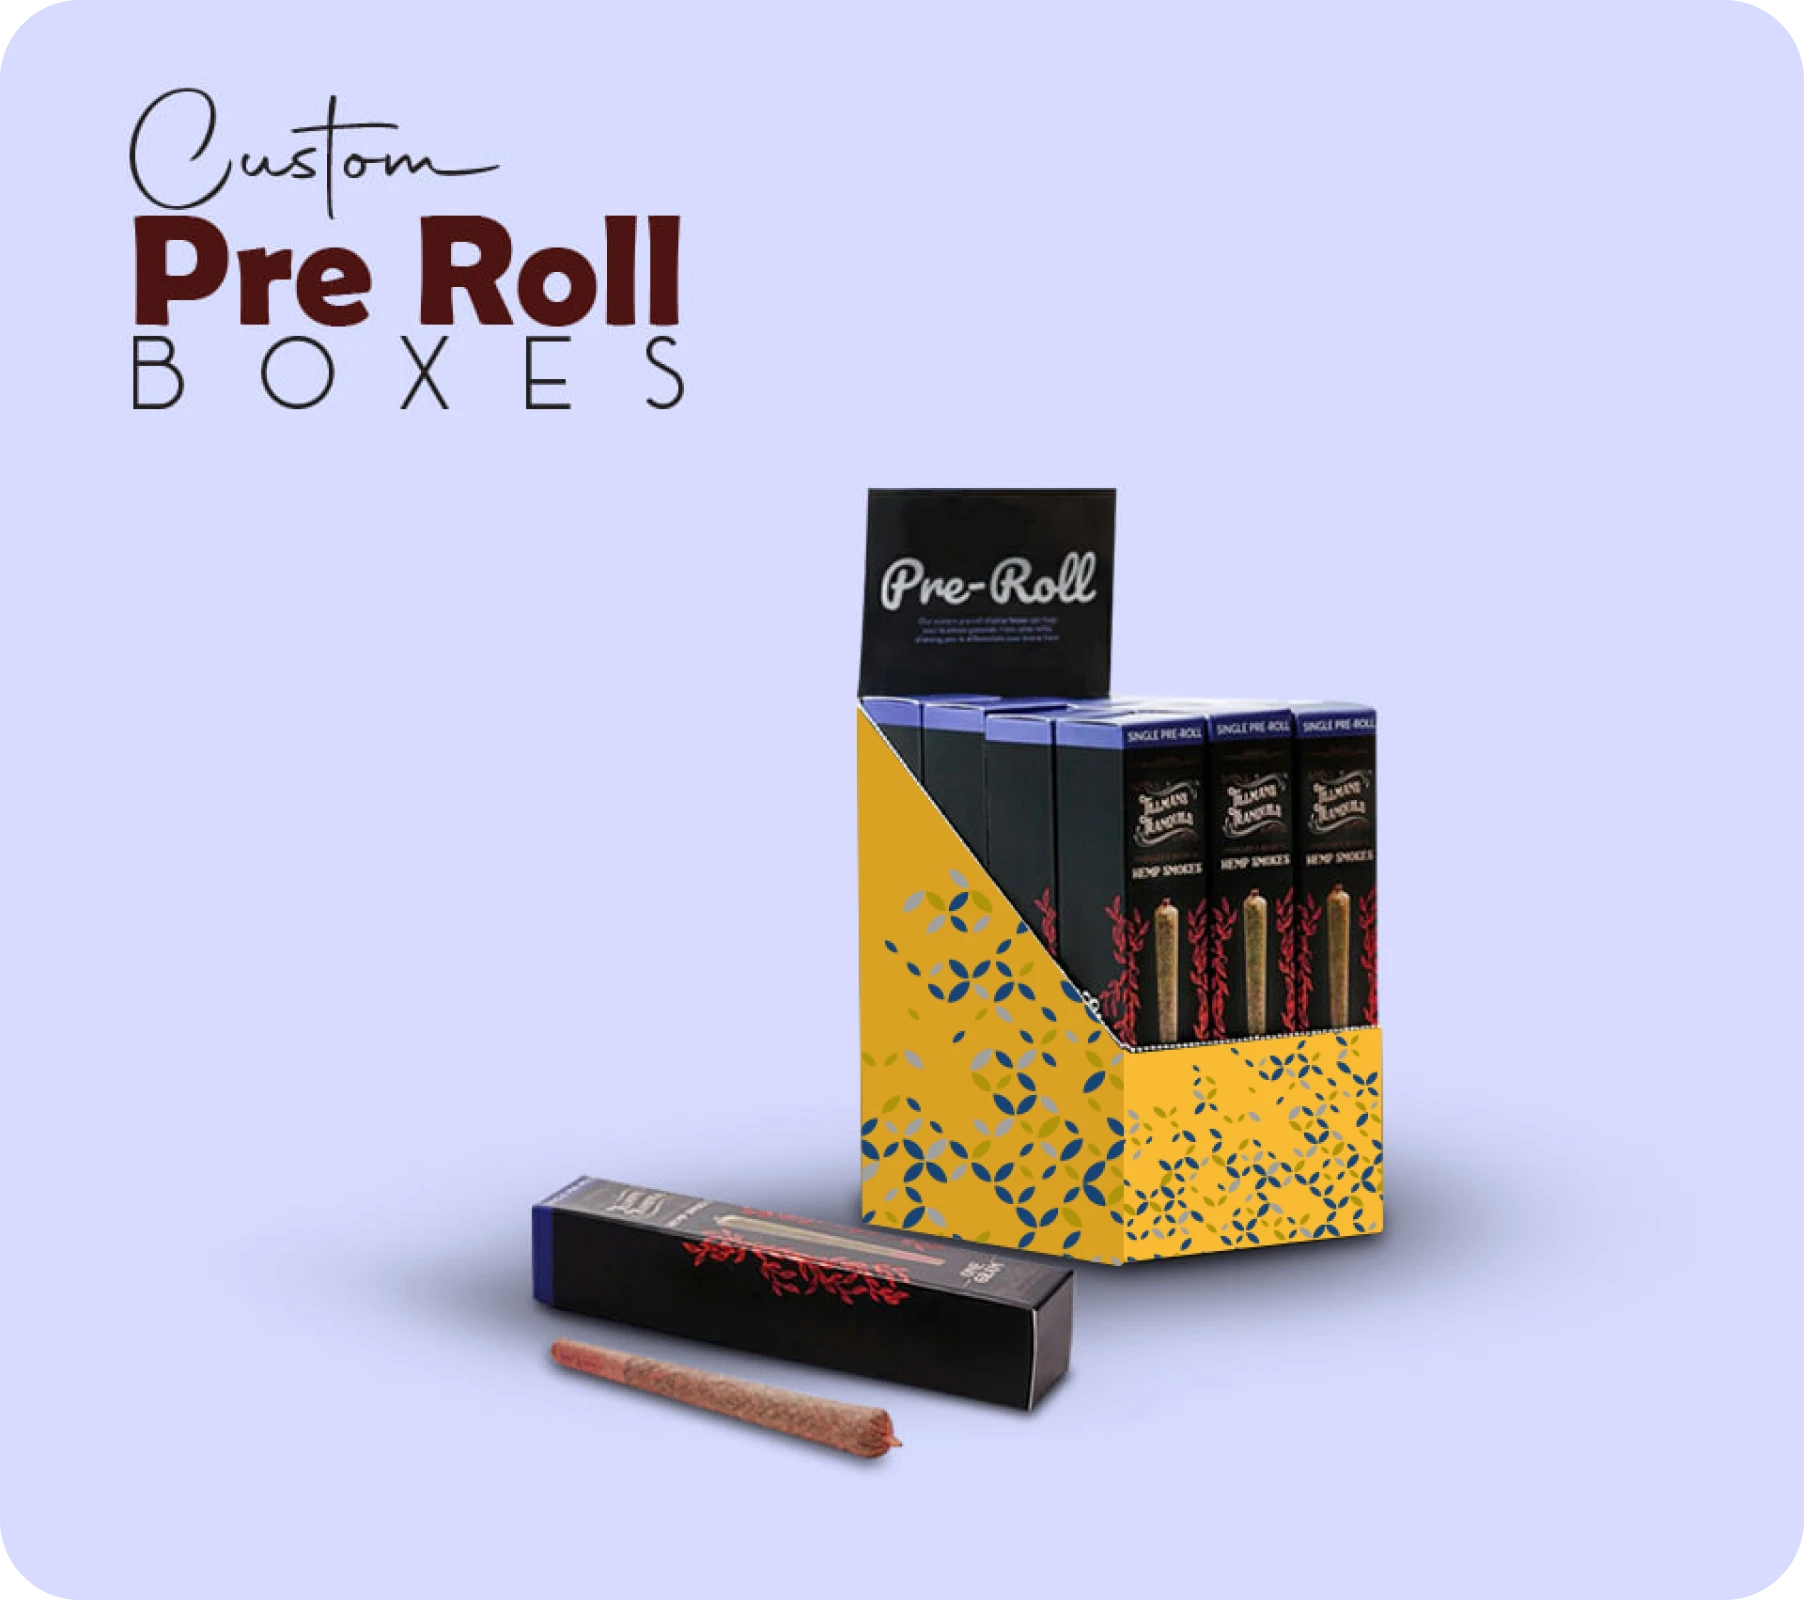 Choose The Box Lane for Pre Roll Display Boxes Packaging | The Box Lane